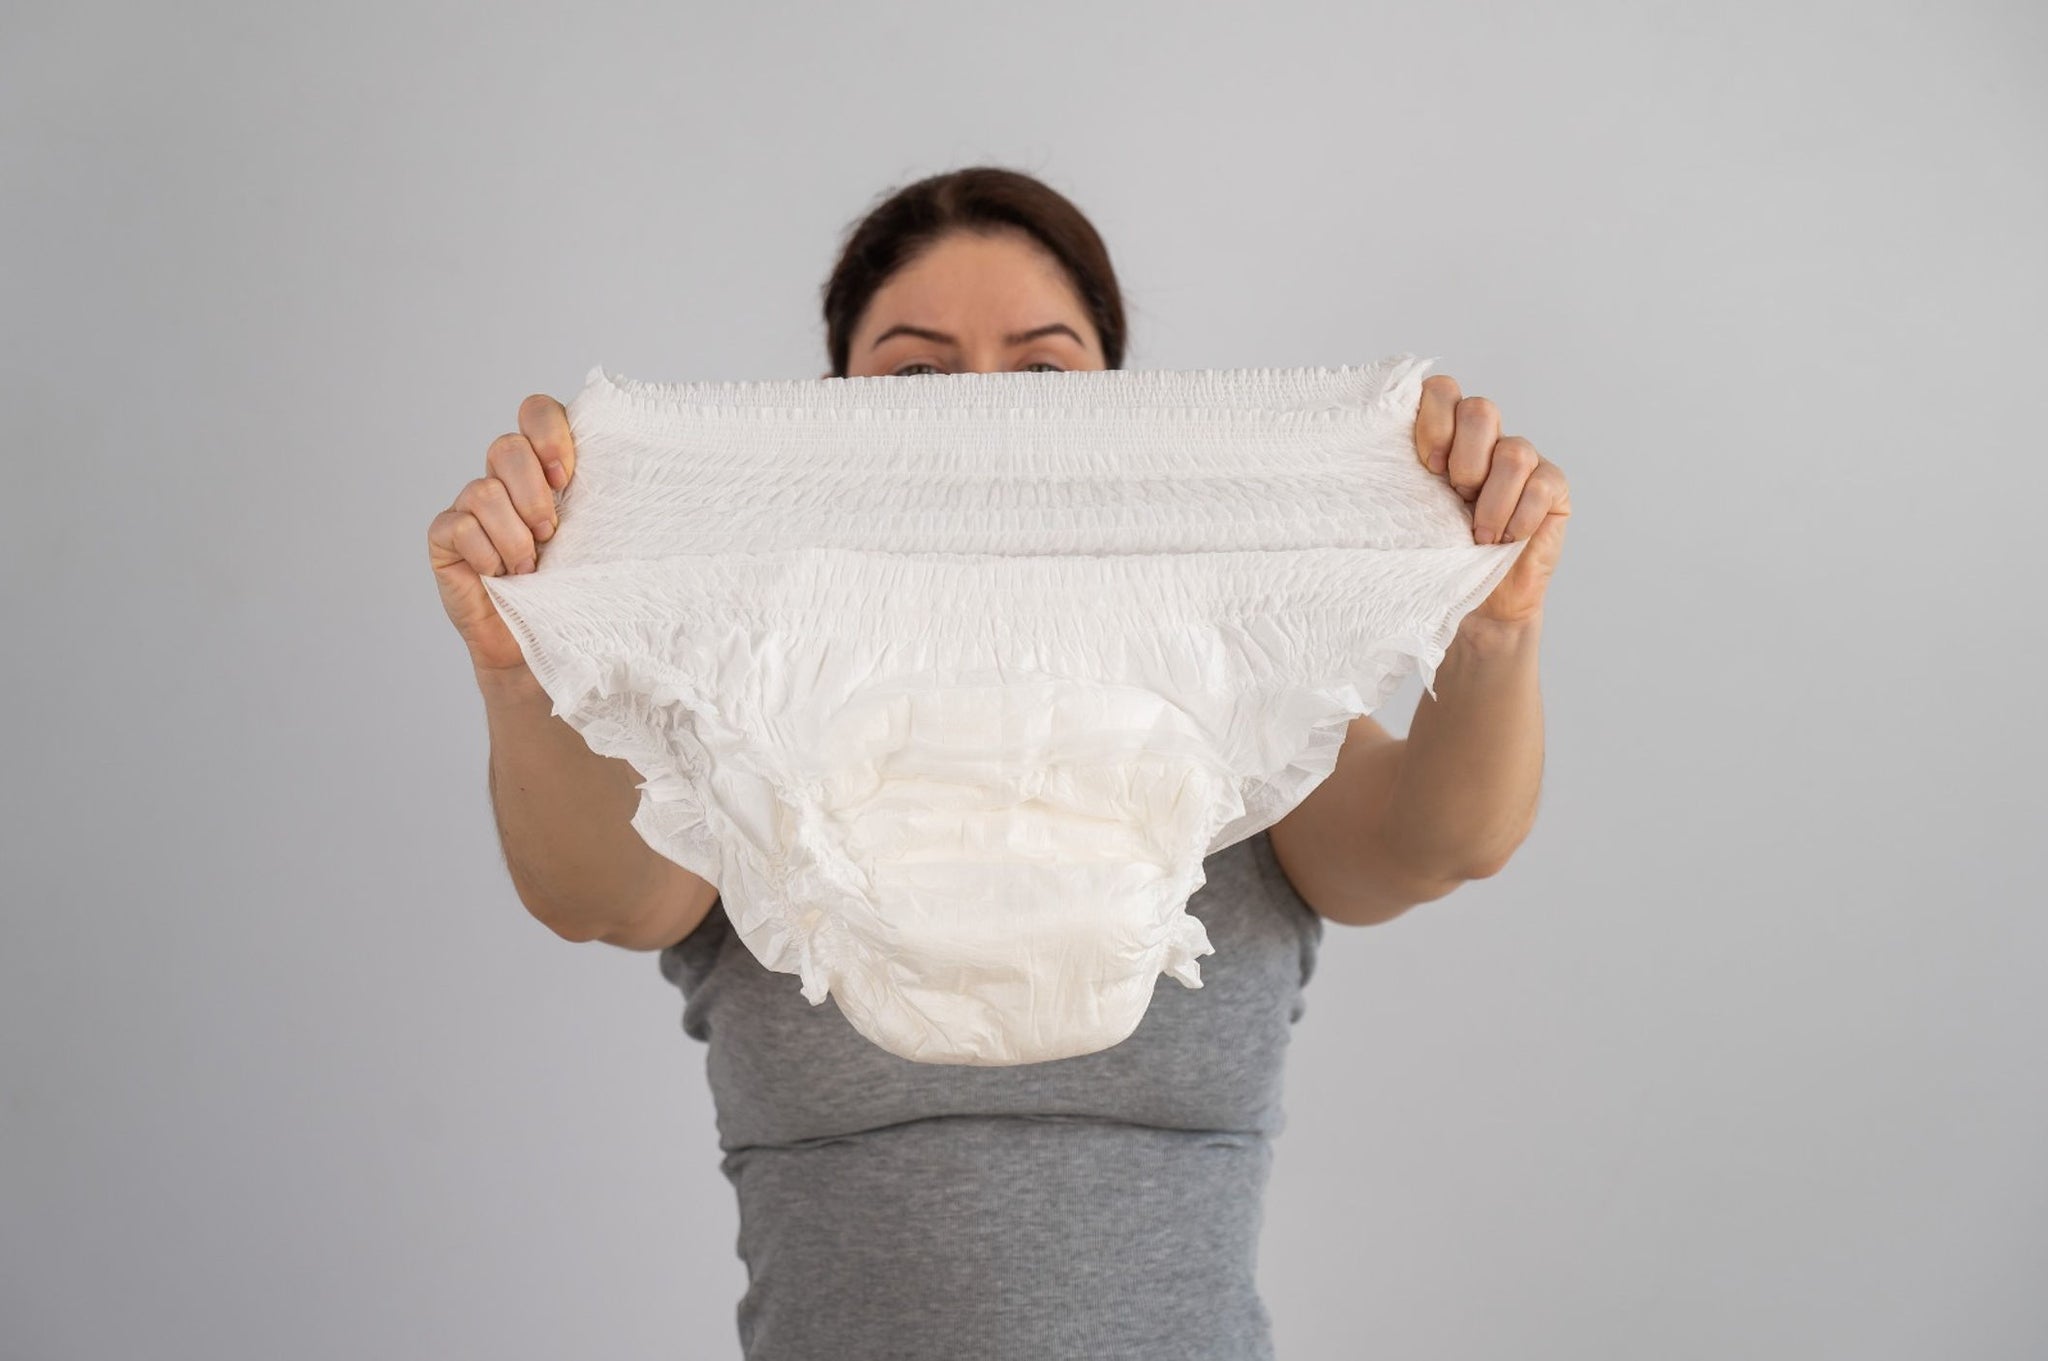 Choosing the Right Adult Diaper for Women